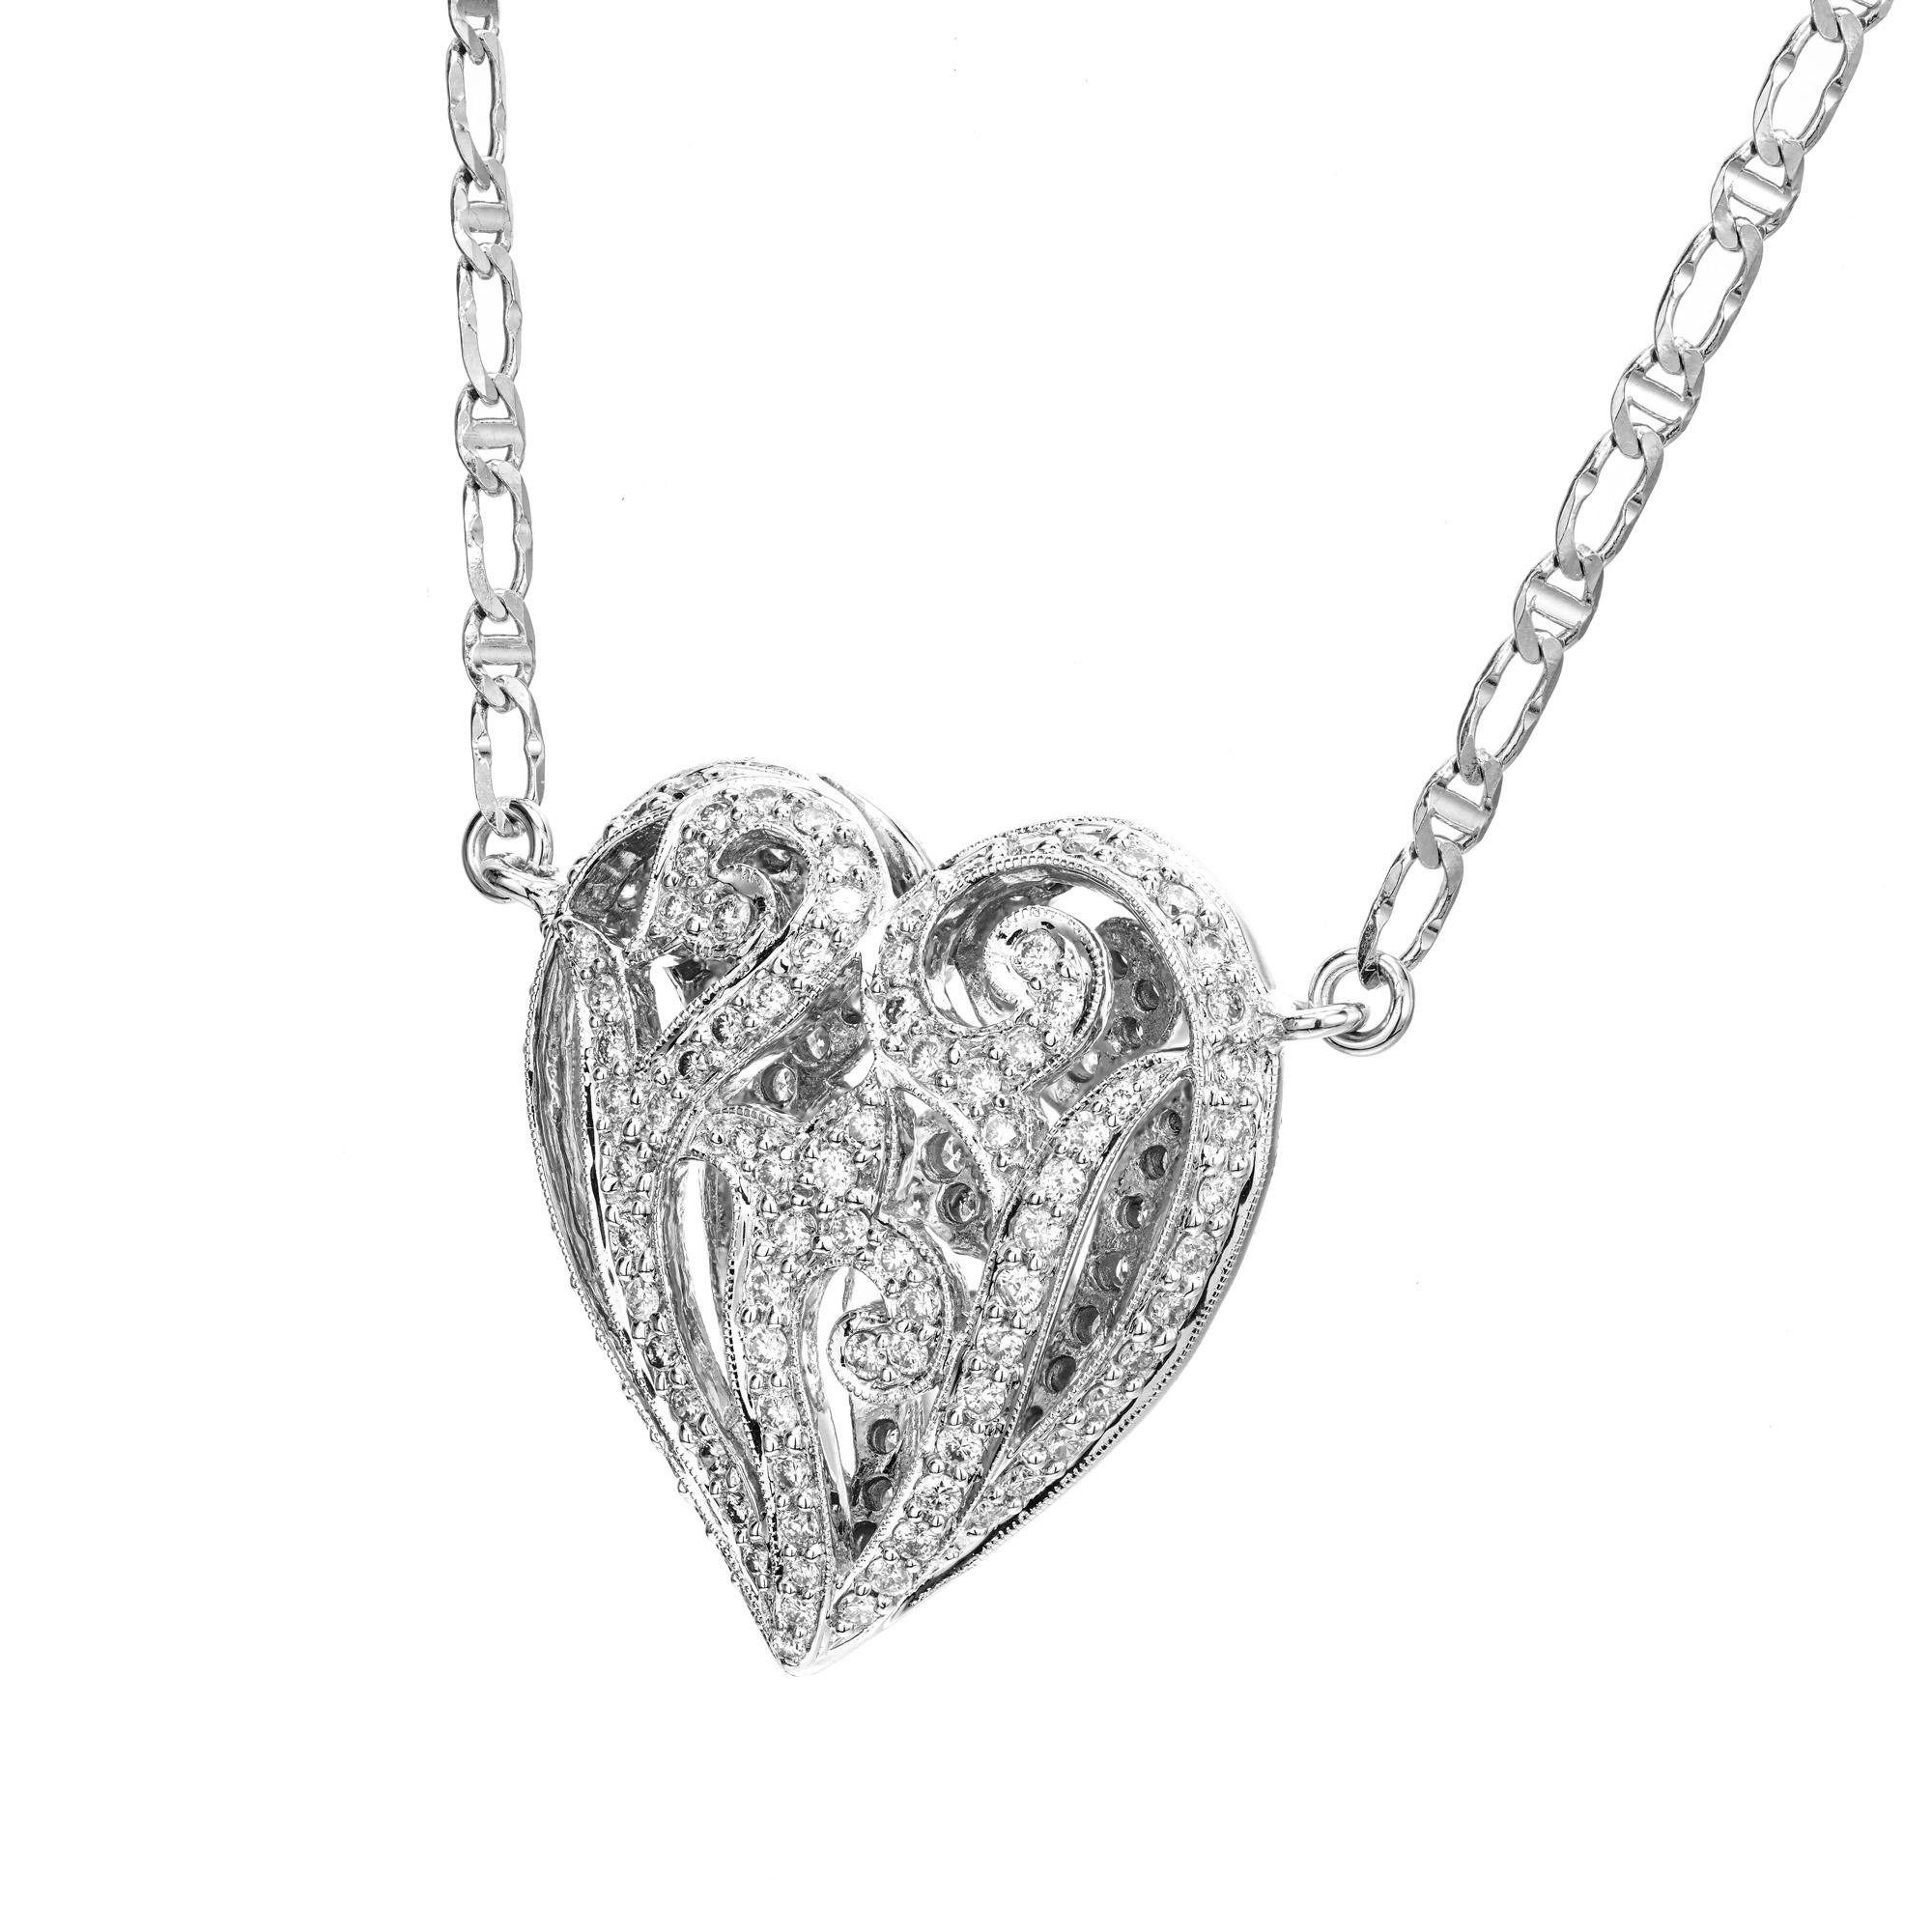 1.75 Carat Round Diamond White Gold Puffed Heart Pendant Necklace For ...